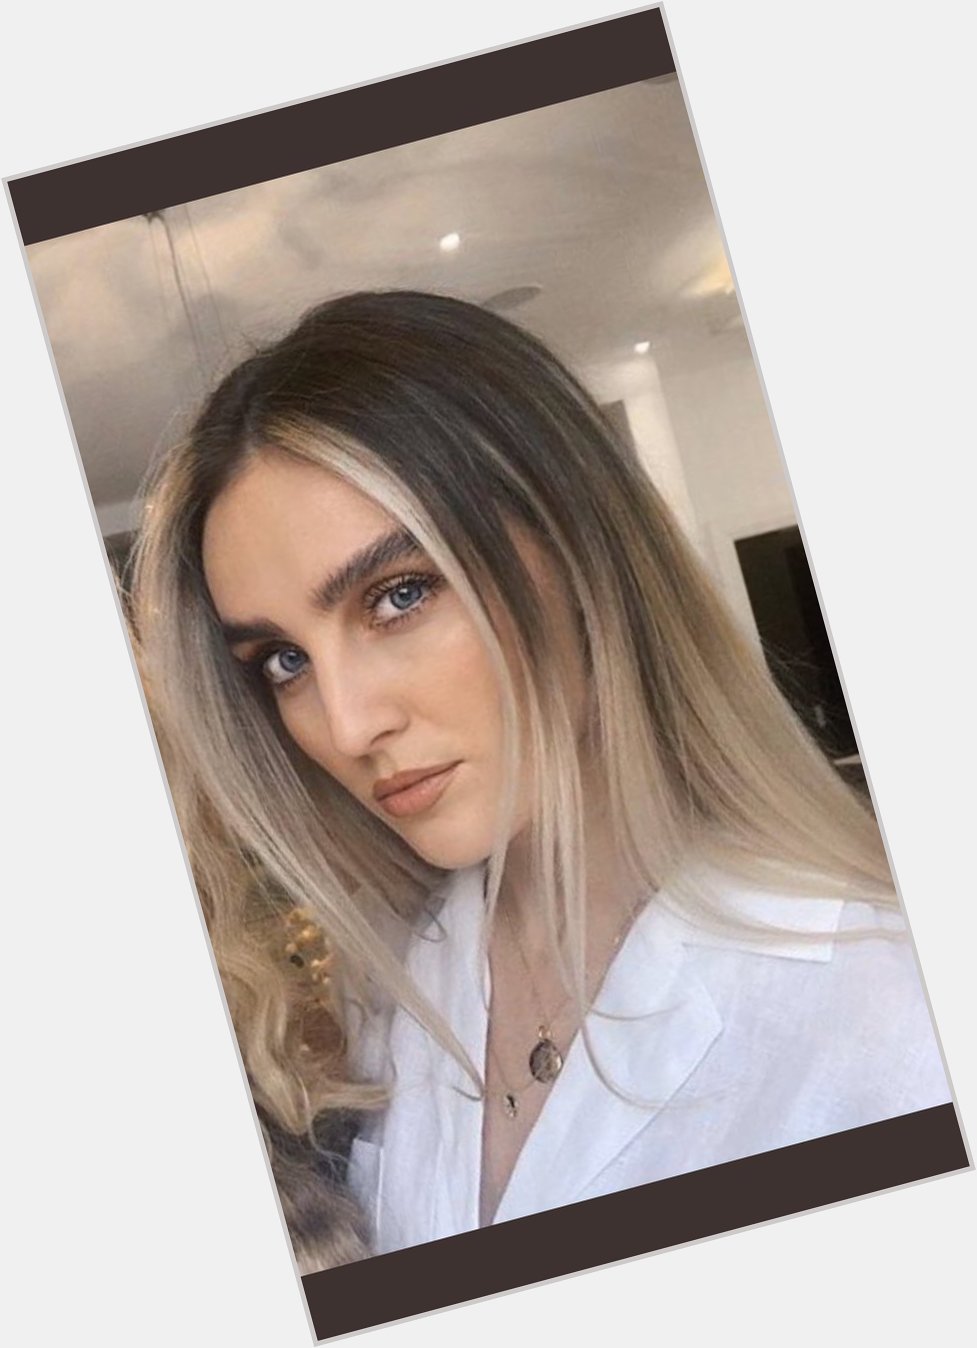 Happy birthday to the amazing Perrie Edwards hope you have a great day Pez 